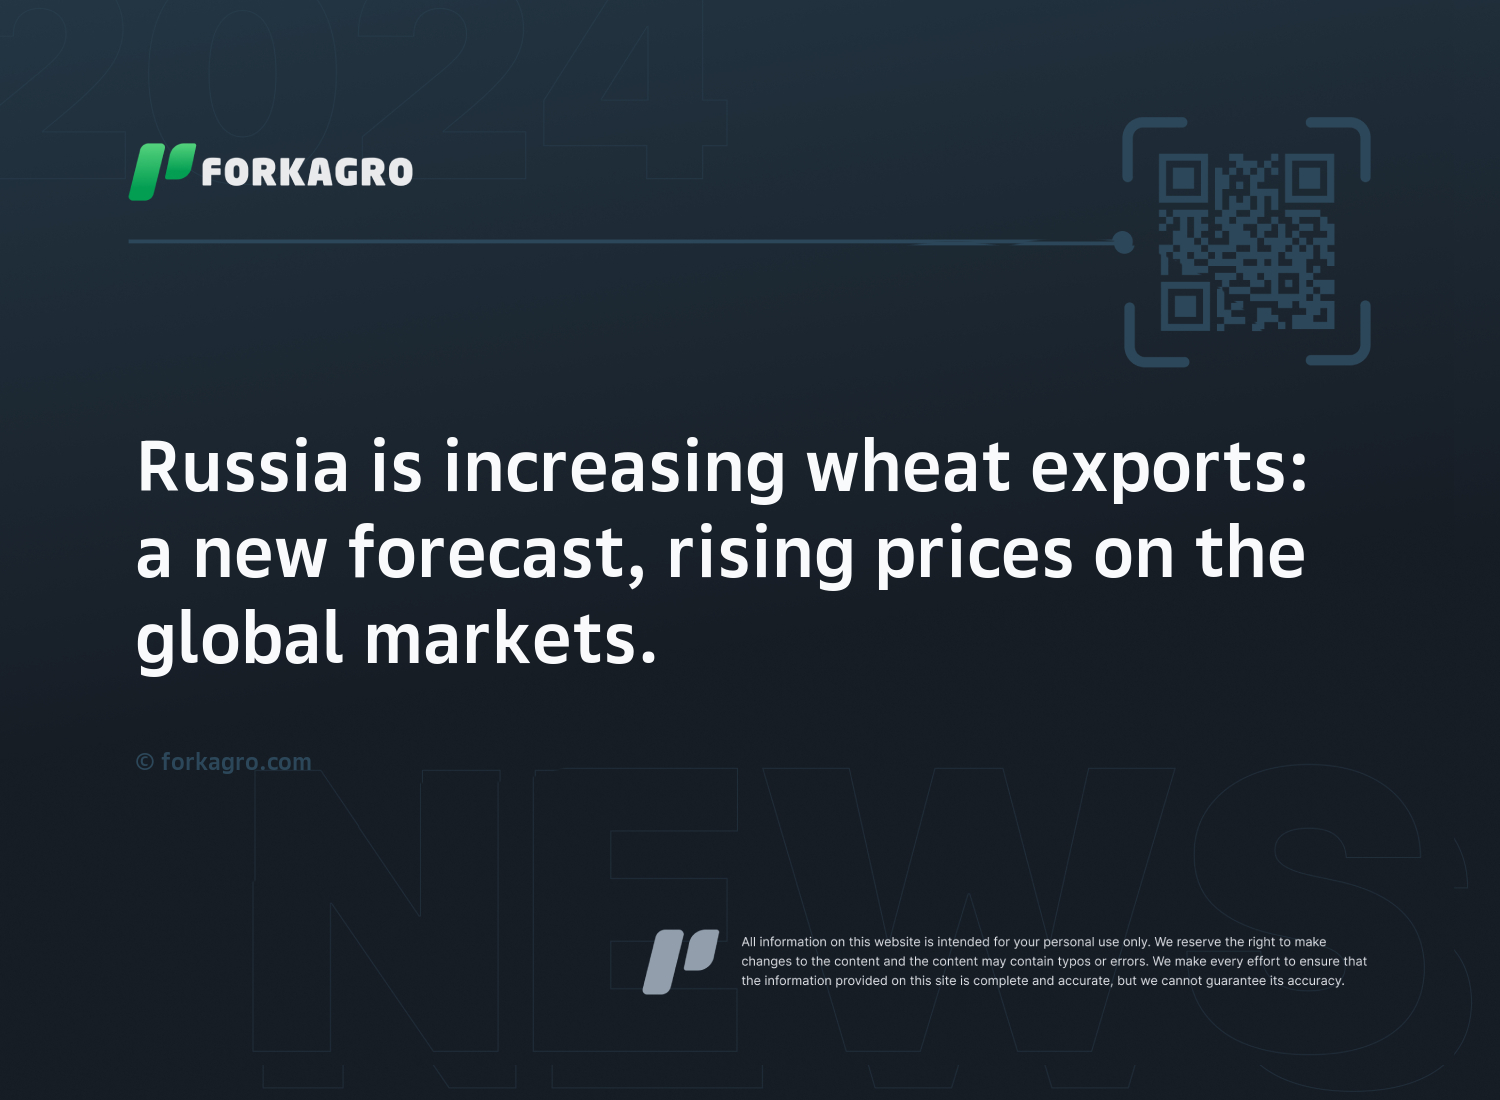 Russia is increasing wheat exports: a new forecast, rising prices on the global markets.